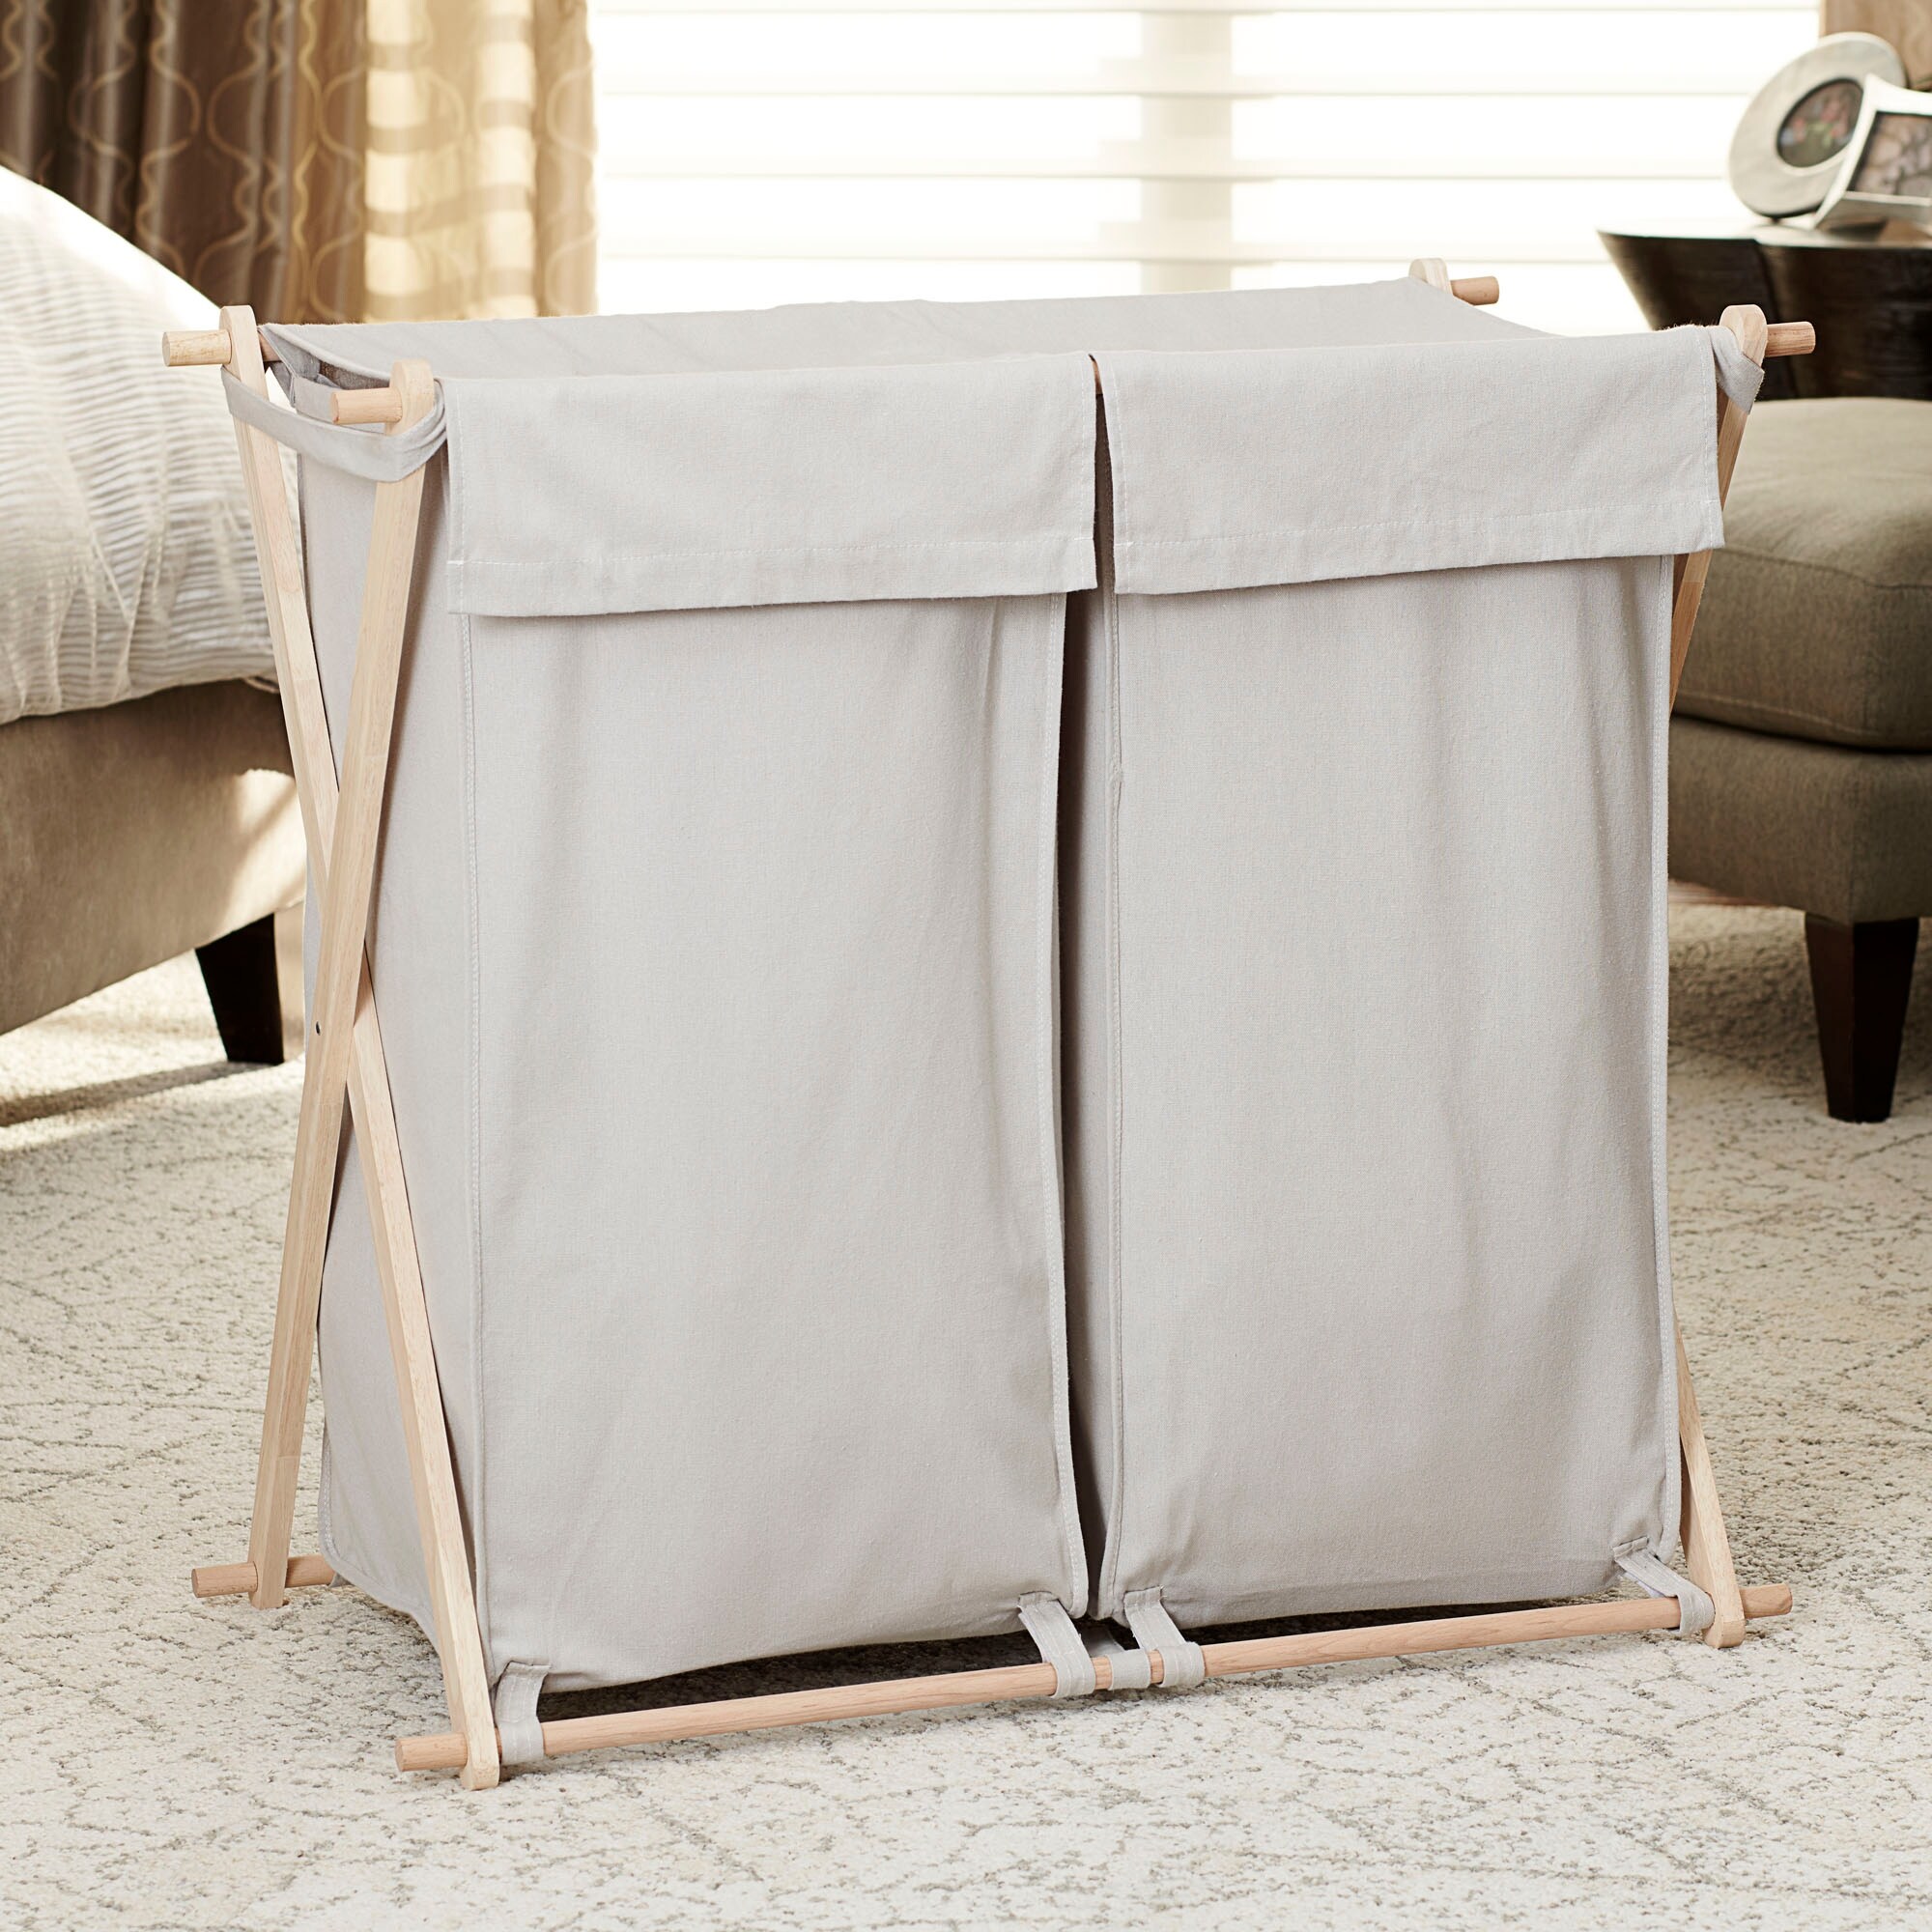 Household Essentials Collapsible Wood X-Frame Laundry Hamper with Black  Canvas Bag - On Sale - Bed Bath & Beyond - 33838841